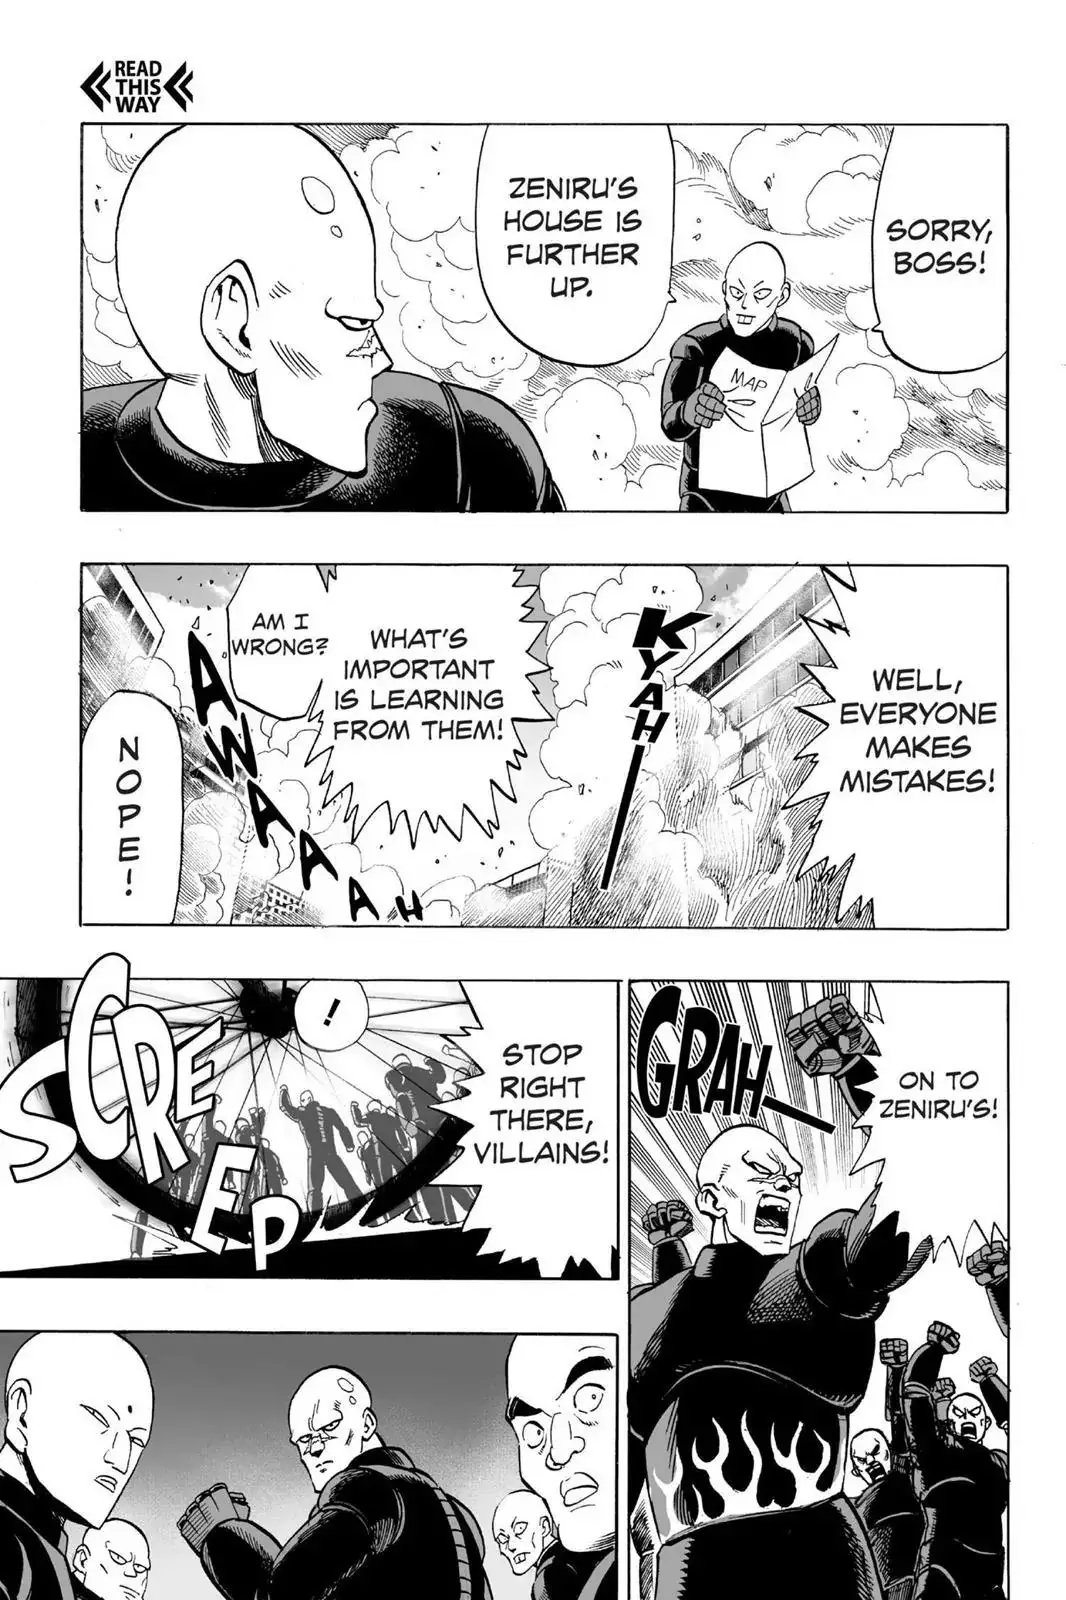 One Punch Man Chapter 12, READ One Punch Man Chapter 12 ONLINE, lost in the cloud genre,lost in the cloud gif,lost in the cloud girl,lost in the cloud goods,lost in the cloud goodreads,lost in the cloud,lost ark cloud gaming,lost odyssey cloud gaming,lost in the cloud fanart,lost in the cloud fanfic,lost in the cloud fandom,lost in the cloud first kiss,lost in the cloud font,lost in the cloud ending,lost in the cloud episode 97,lost in the cloud edit,lost in the cloud explained,lost in the cloud dog,lost in the cloud discord server,lost in the cloud desktop wallpaper,lost in the cloud drawing,can't find my cloud on network,lost in the cloud characters,lost in the cloud chapter 93 release date,lost in the cloud birthday,lost in the cloud birthday art,lost in the cloud background,lost in the cloud banner,lost in the clouds meaning,what is the black cloud in lost,lost in the cloud ao3,lost in the cloud anime,lost in the cloud art,lost in the cloud author twitter,lost in the cloud author instagram,lost in the cloud artist,lost in the cloud acrylic stand,lost in the cloud artist twitter,lost in the cloud art style,lost in the cloud analysis